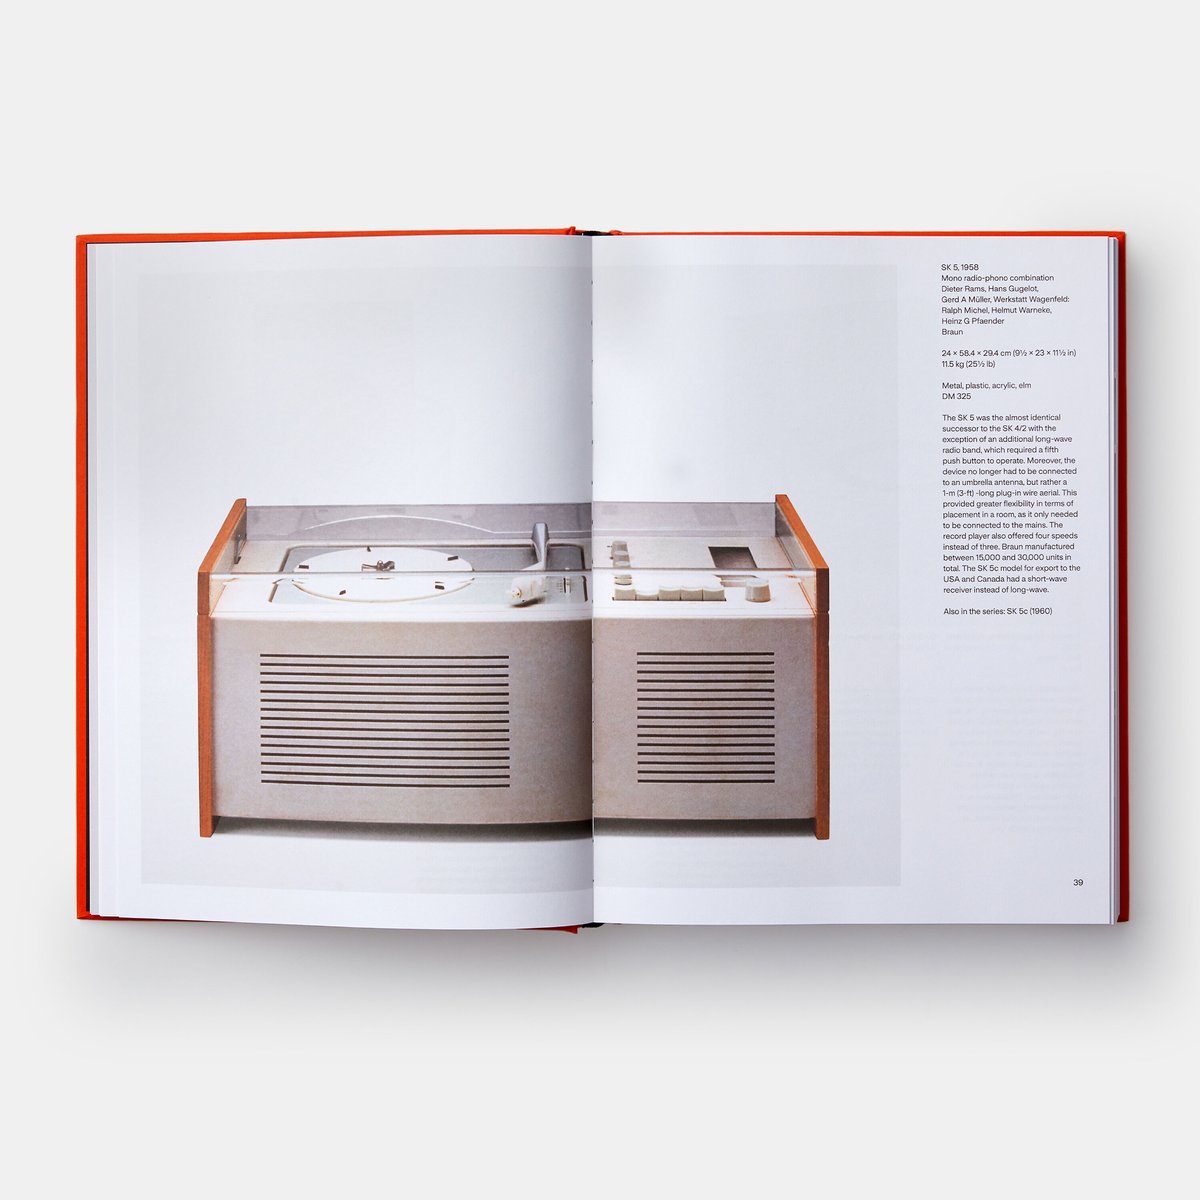 Dieter Rams: The Complete Works | 誠光社 通信販売